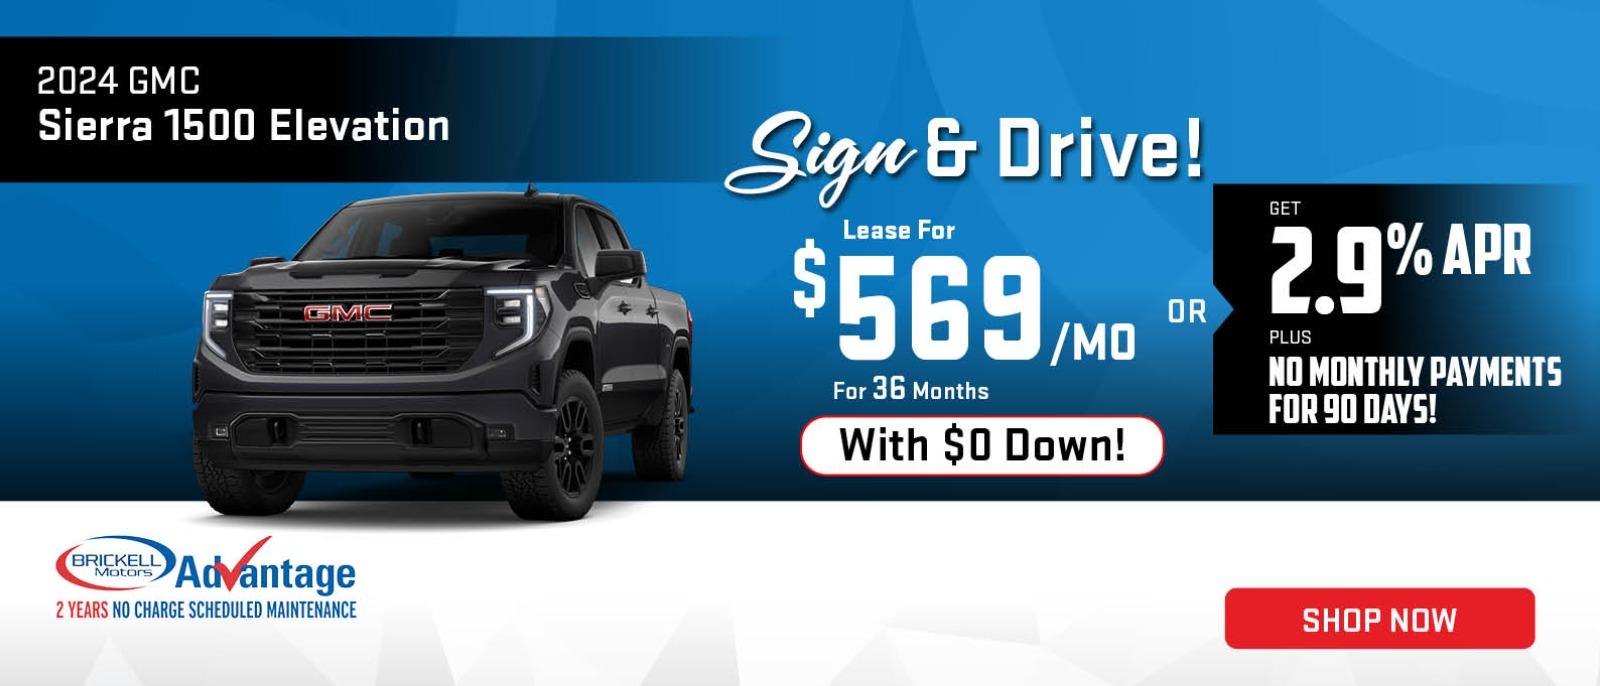 Sign & Drive
Lease for $569 per month for 36 months with $0 down
Or Get 2.9% APR Plus No Monthly Payments for 90 Days!